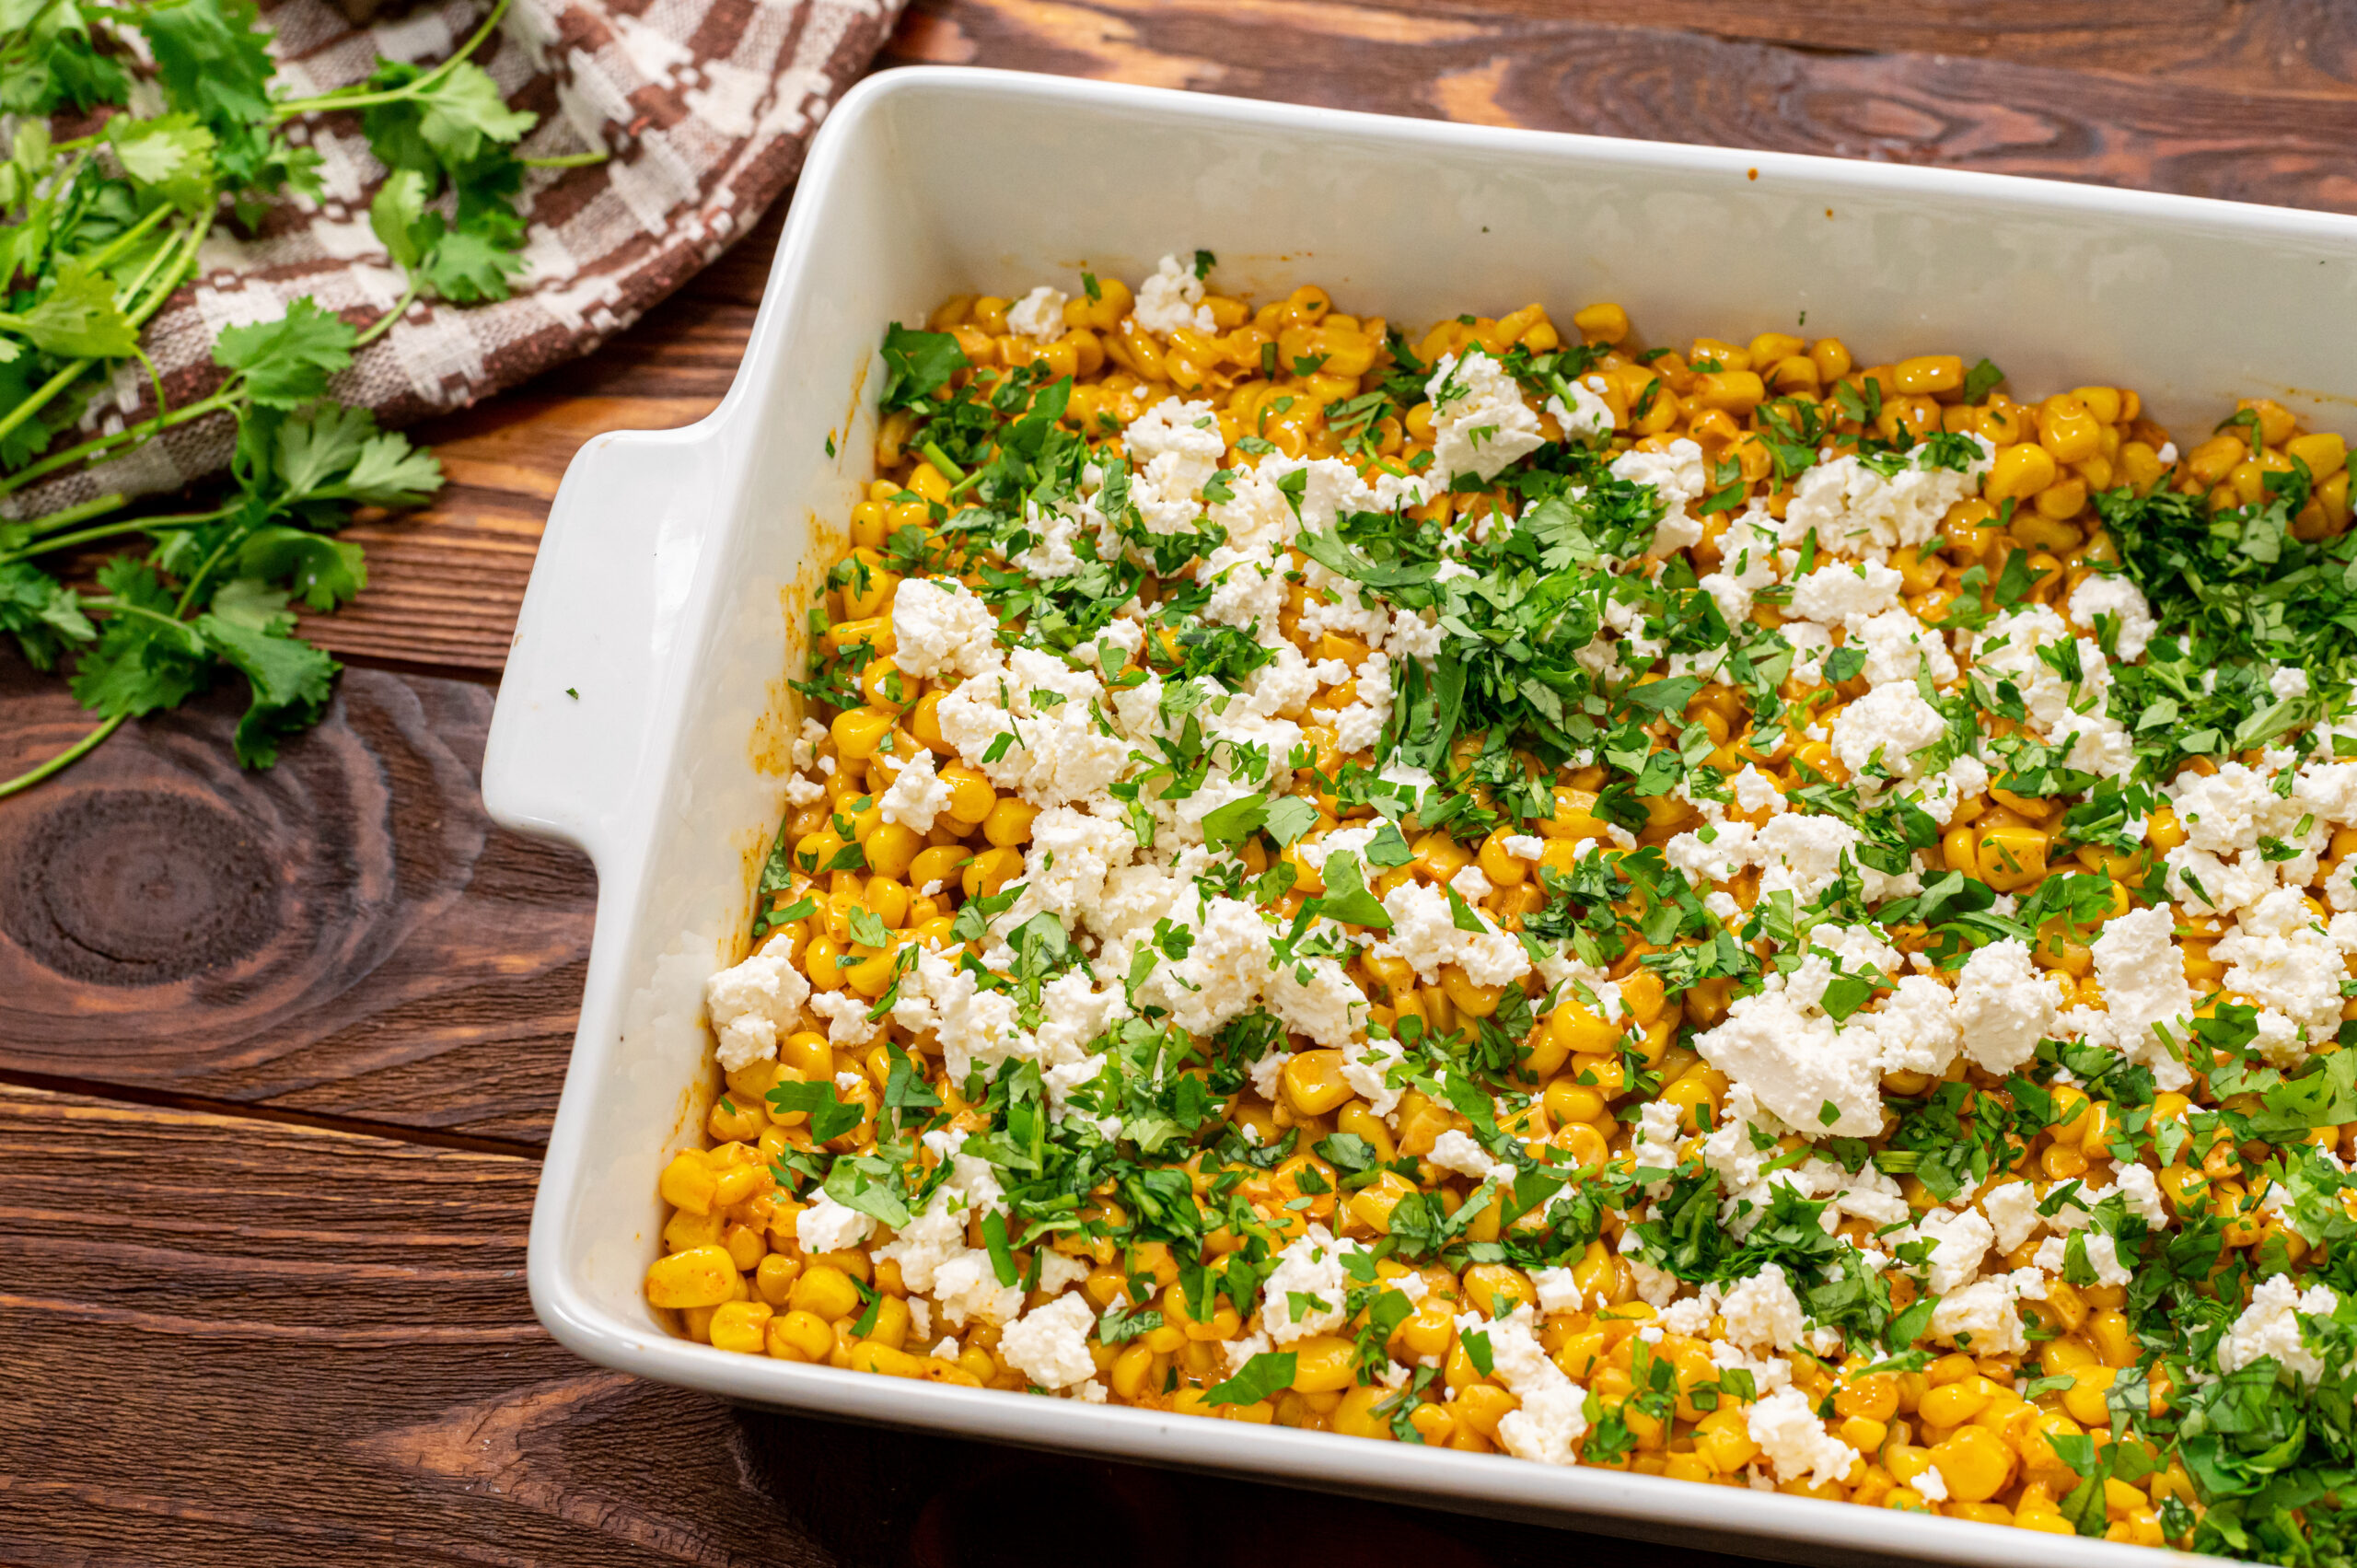 a casserole dish of Mexican corn coated in seasonings, cheeses, and cilantro.